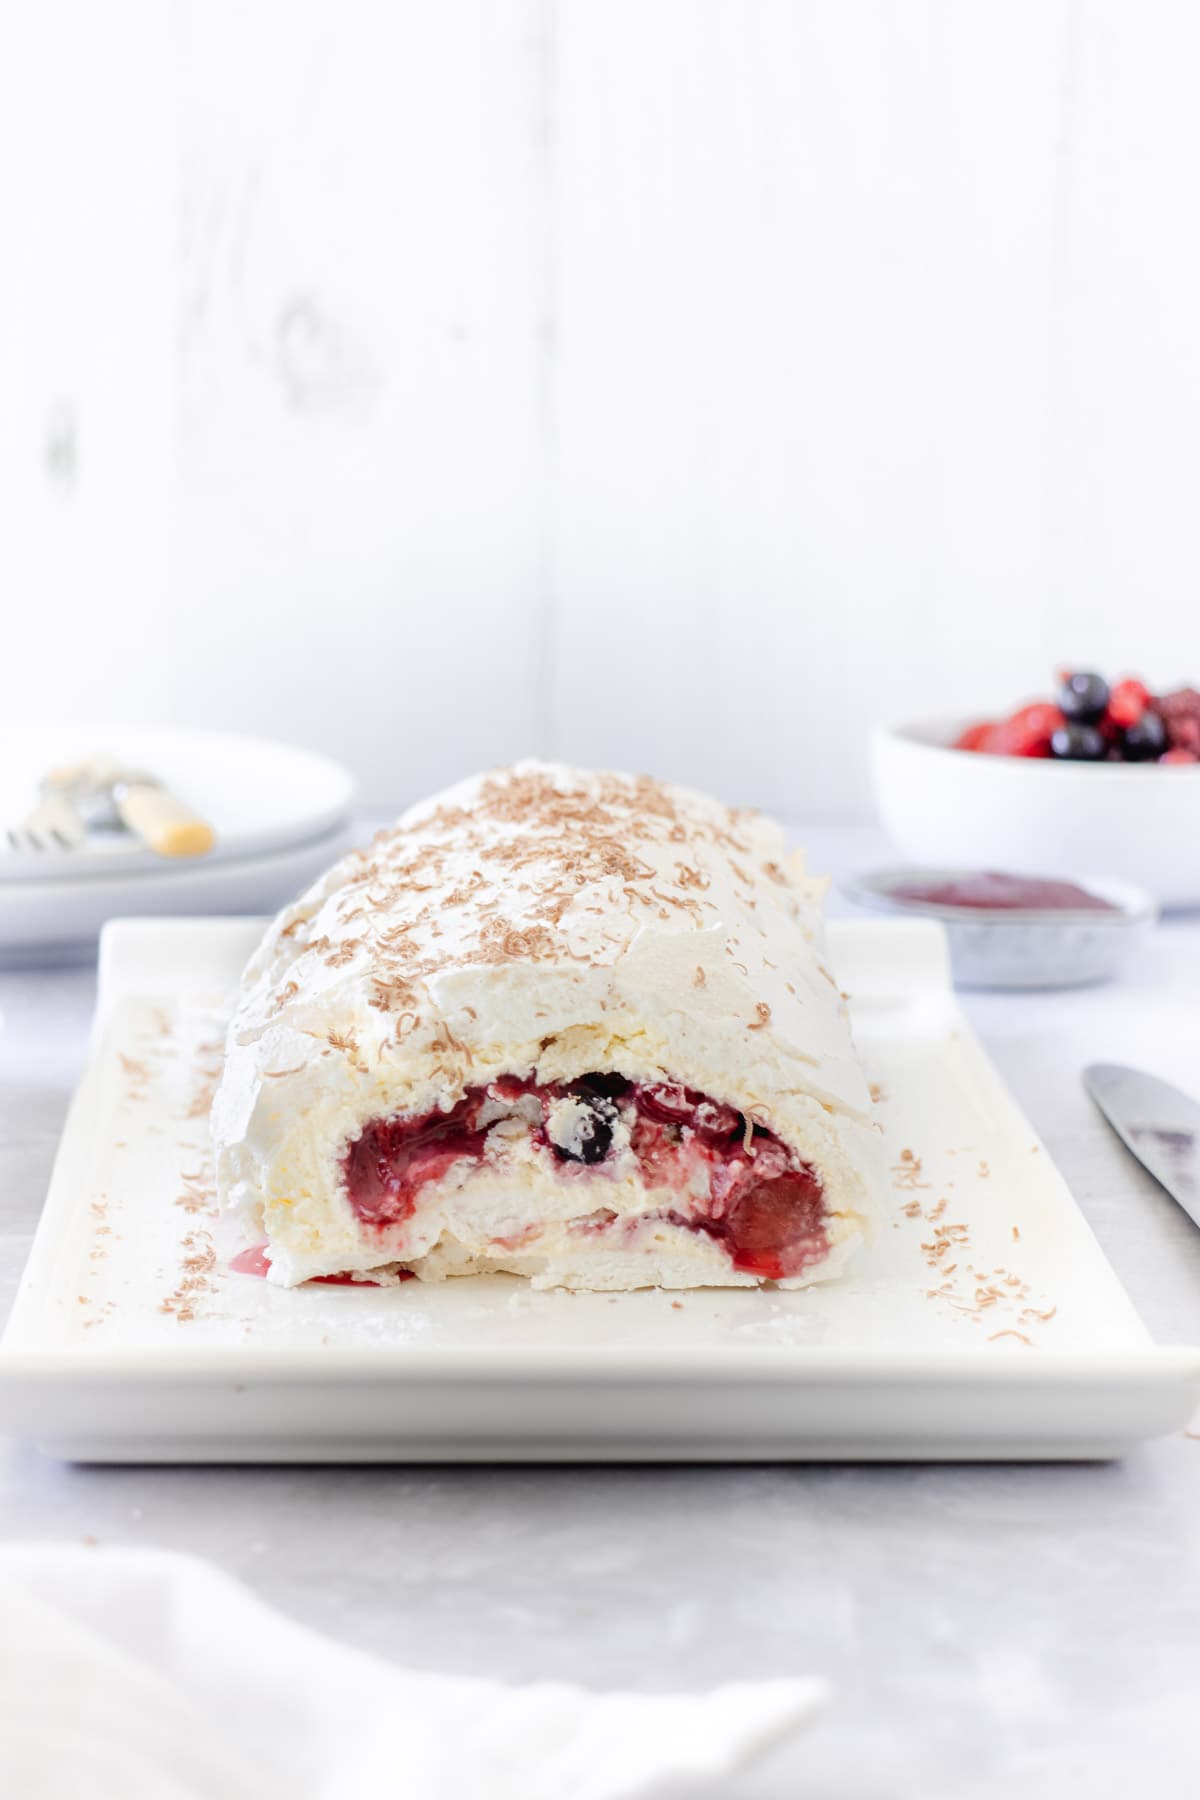 Red berries inside a summer berry meringue roulade with whipped cream